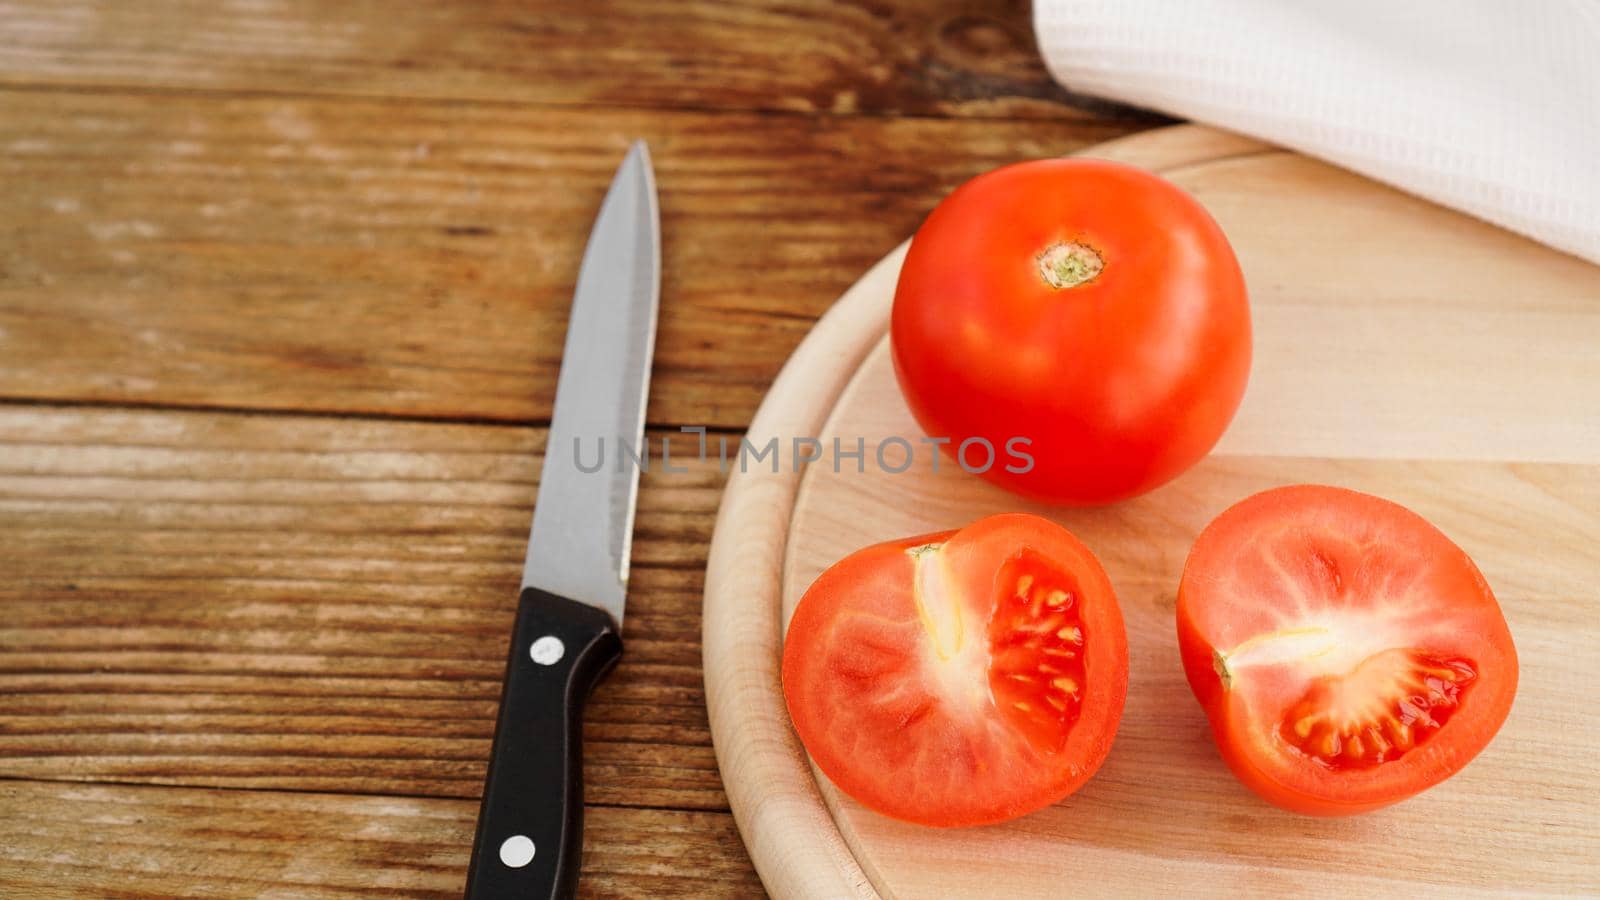 Slice Tomato on a Wooden Cutting Board. Knife and tomatoes on wooden by natali_brill